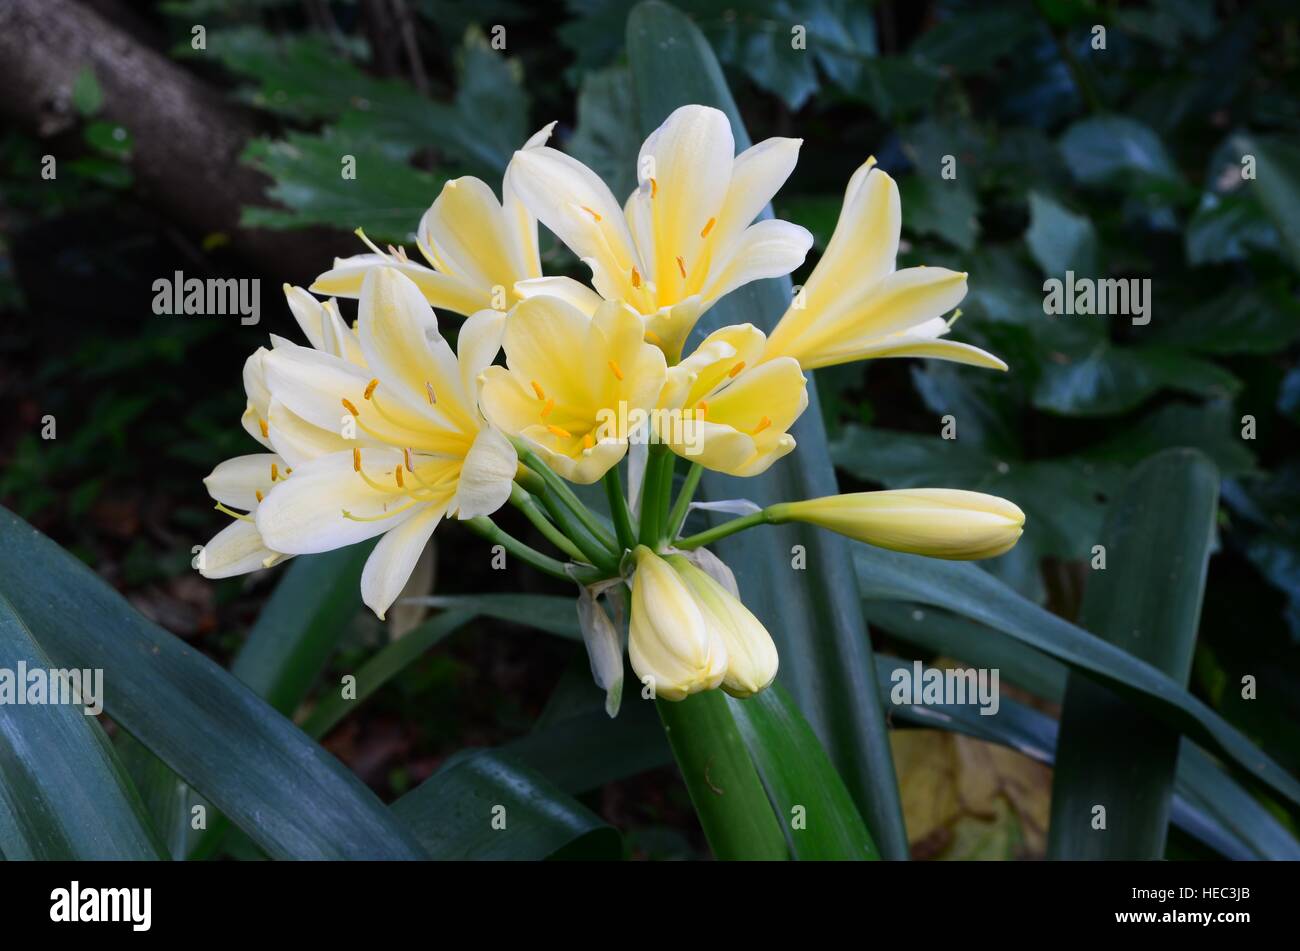 Yellow Clivia miniata. Amaryllidaceae. Propagates naturally from off-shoots. Also known as bush lily. Evergreen plant indigenous to South Africa. Stock Photo